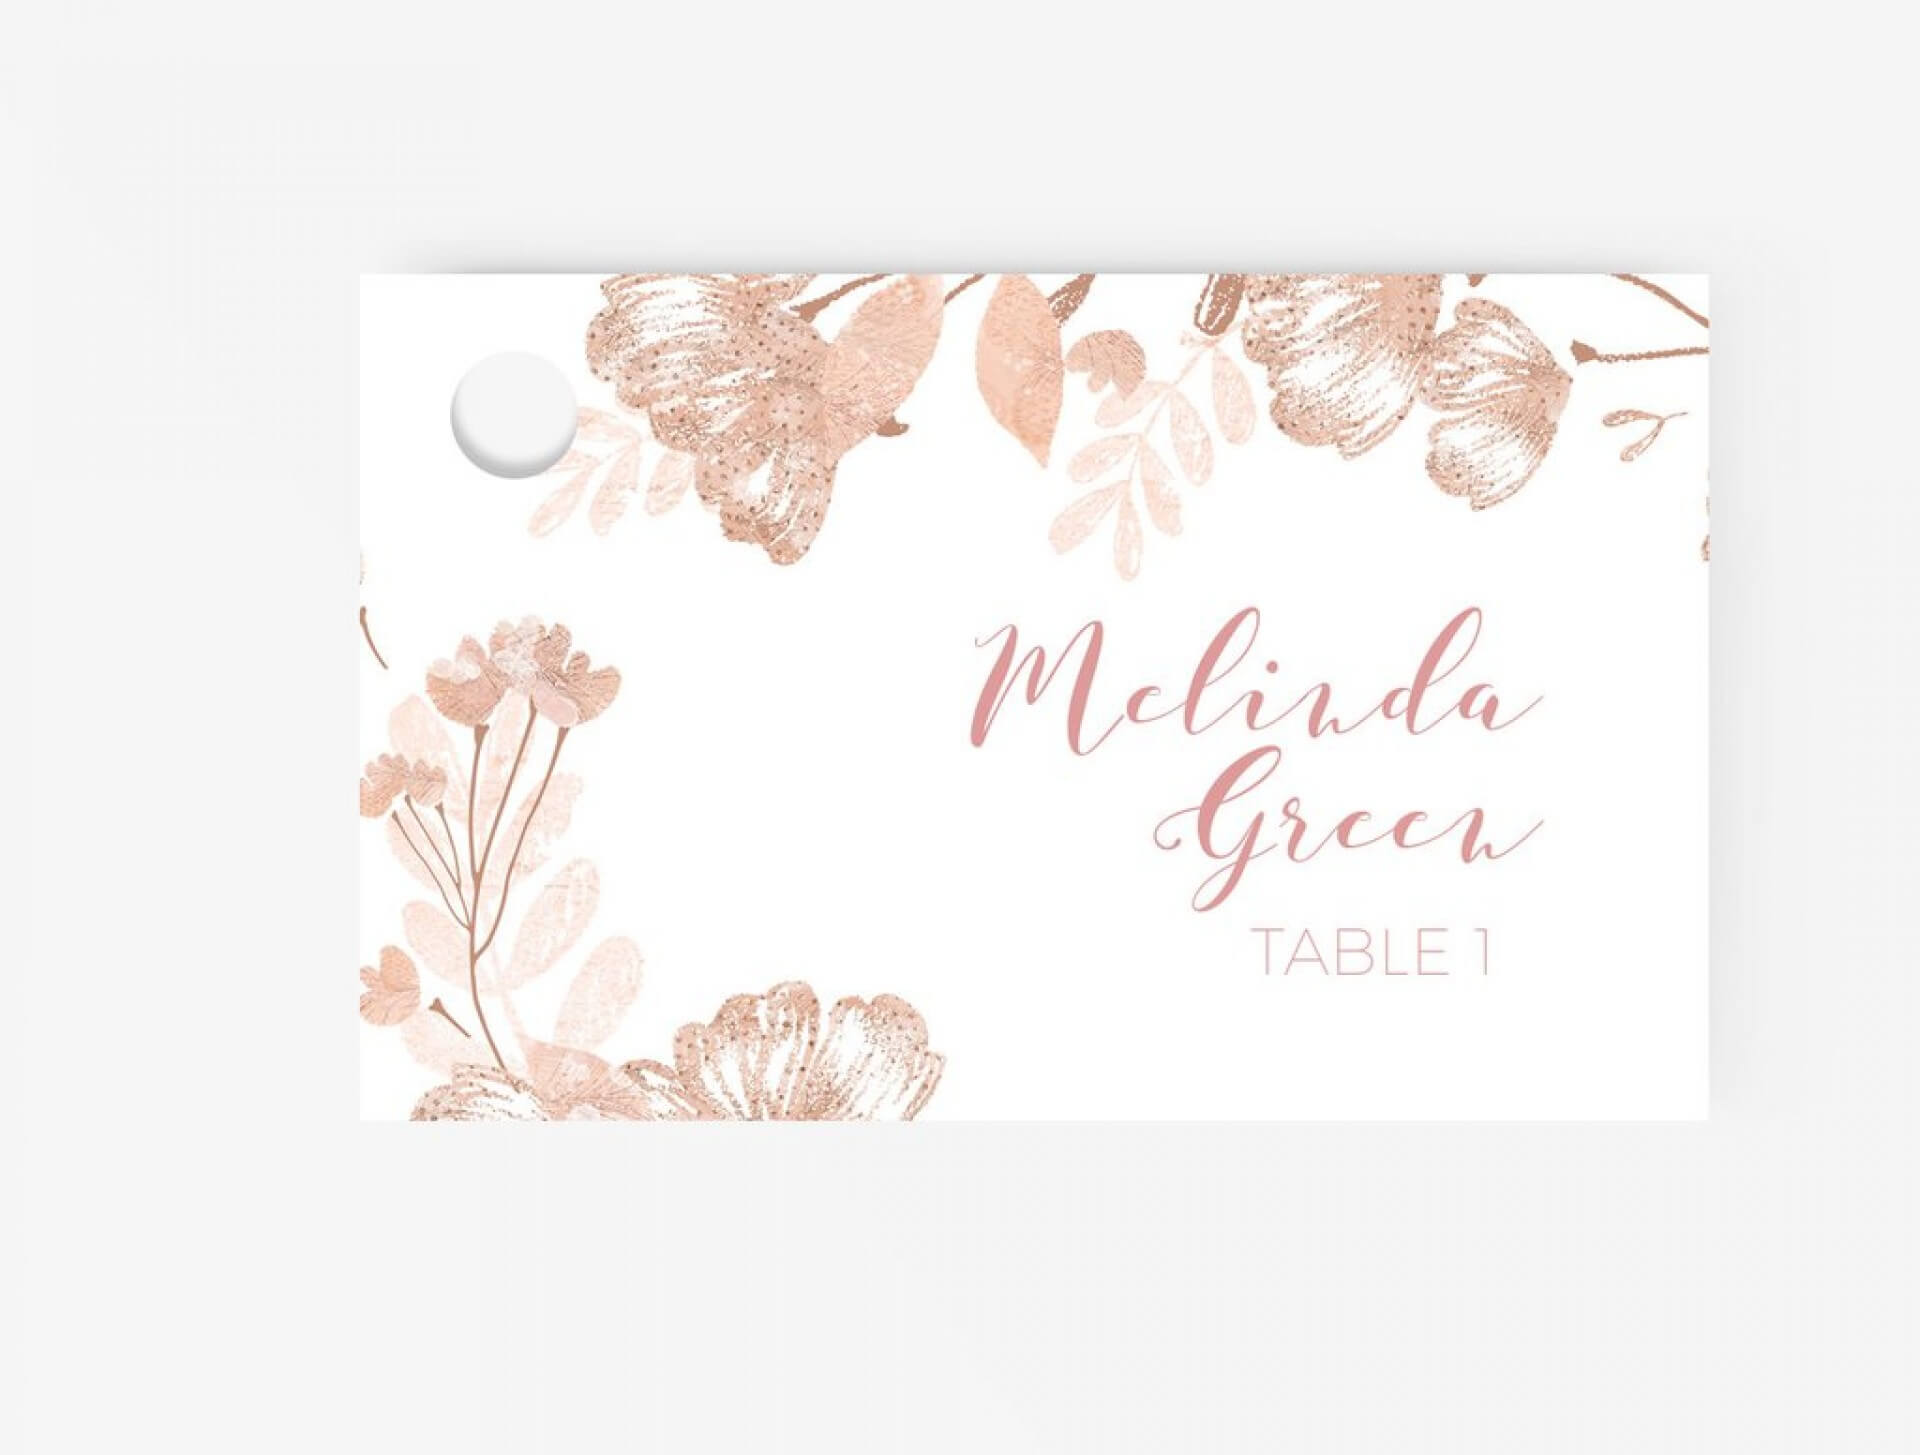 019 Template For Place Cards Il Fullxfull 1542140750 Dg3V With Regard To Place Card Template Free 6 Per Page